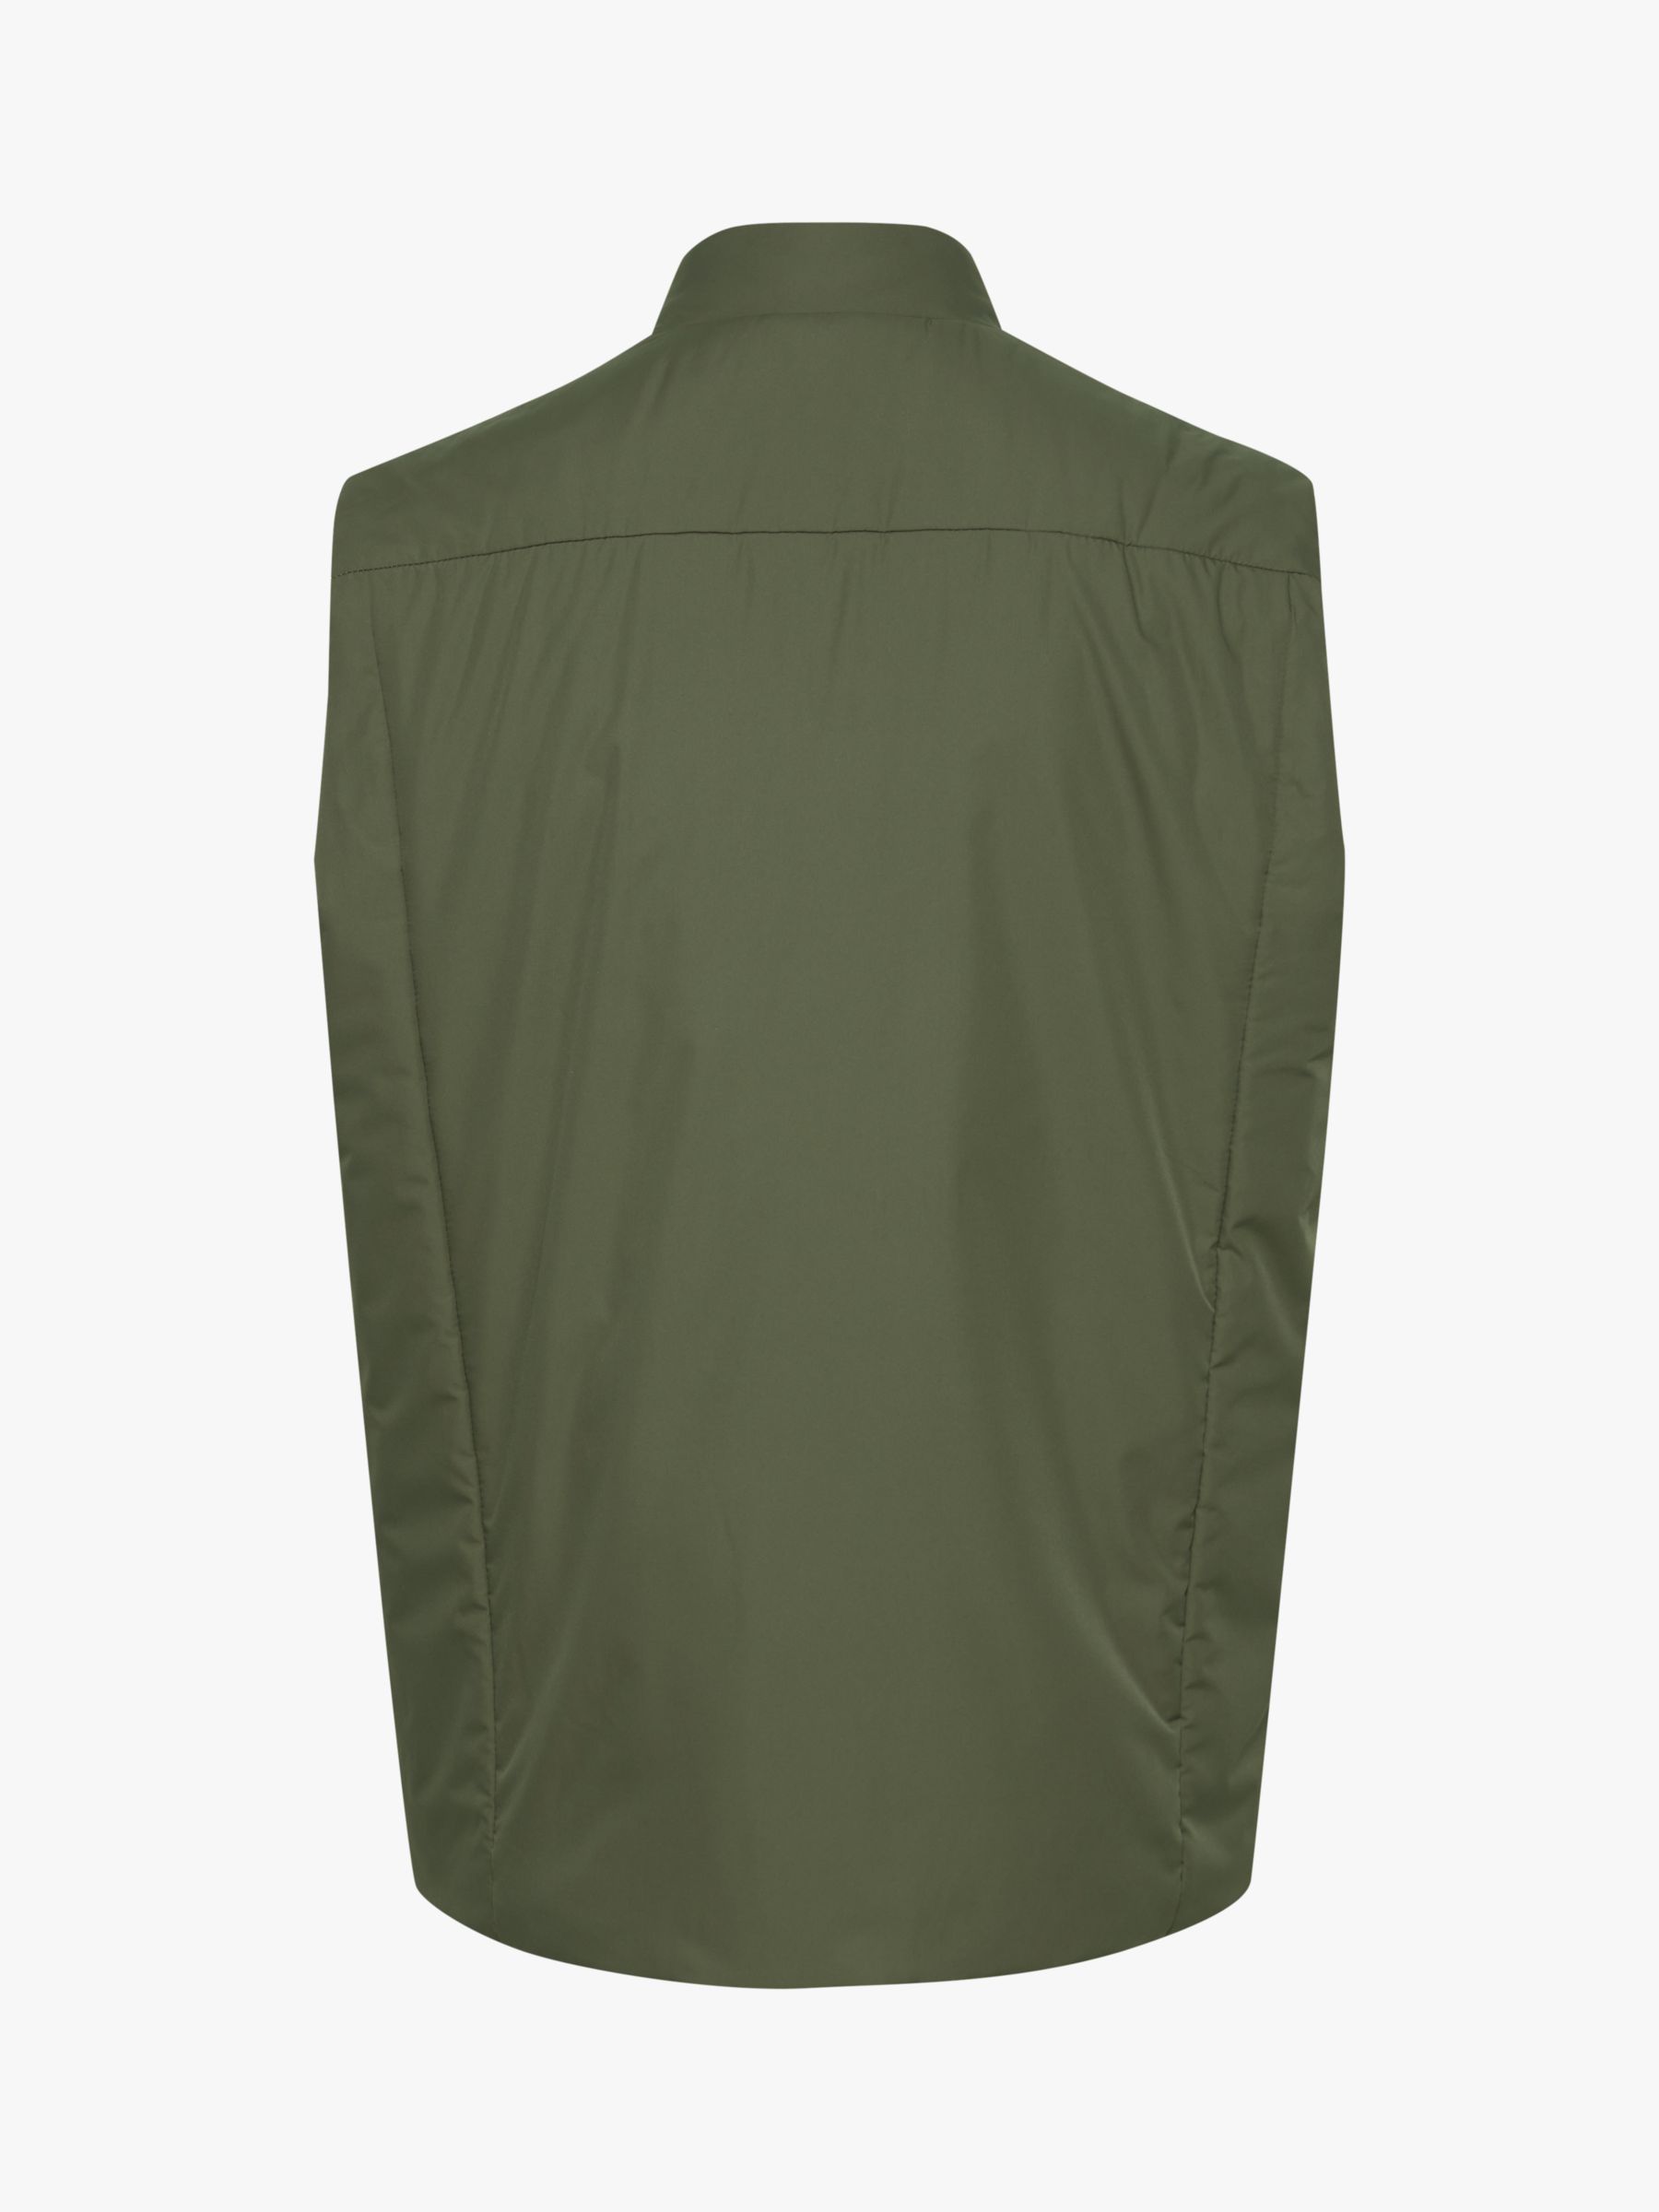 Buy Casual Friday Oates Thinsulate Gilet Online at johnlewis.com